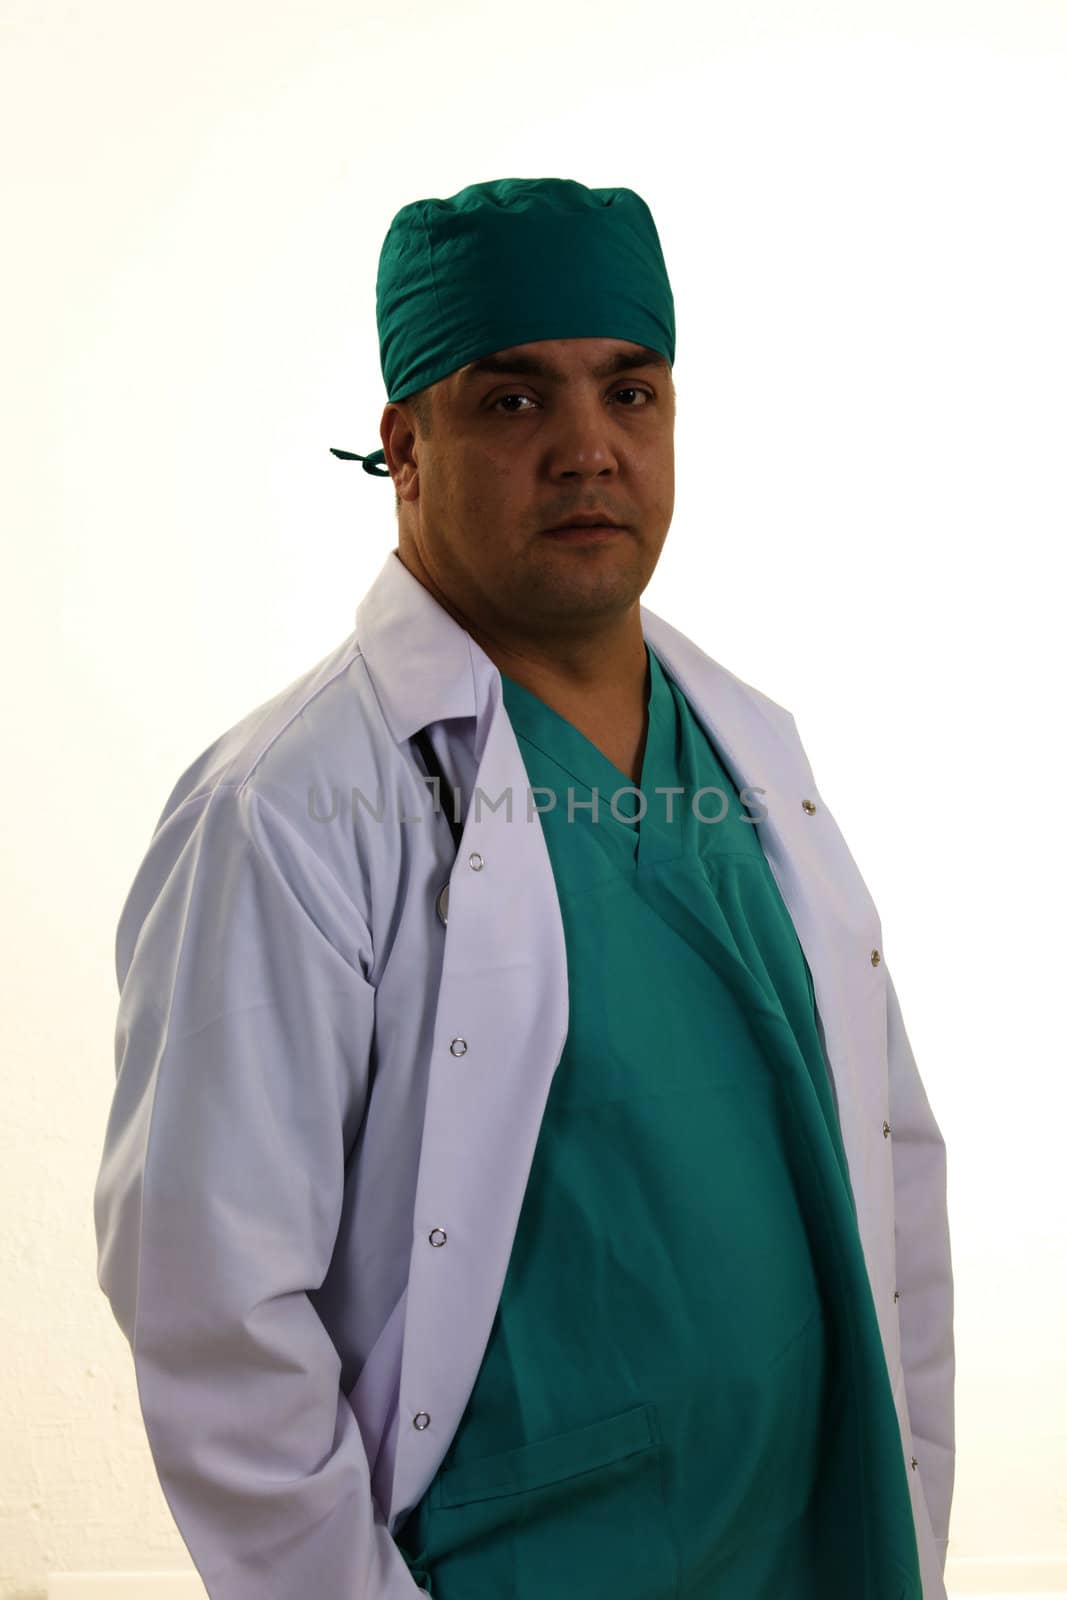 Stock image of male doctor over white background  by senkaya